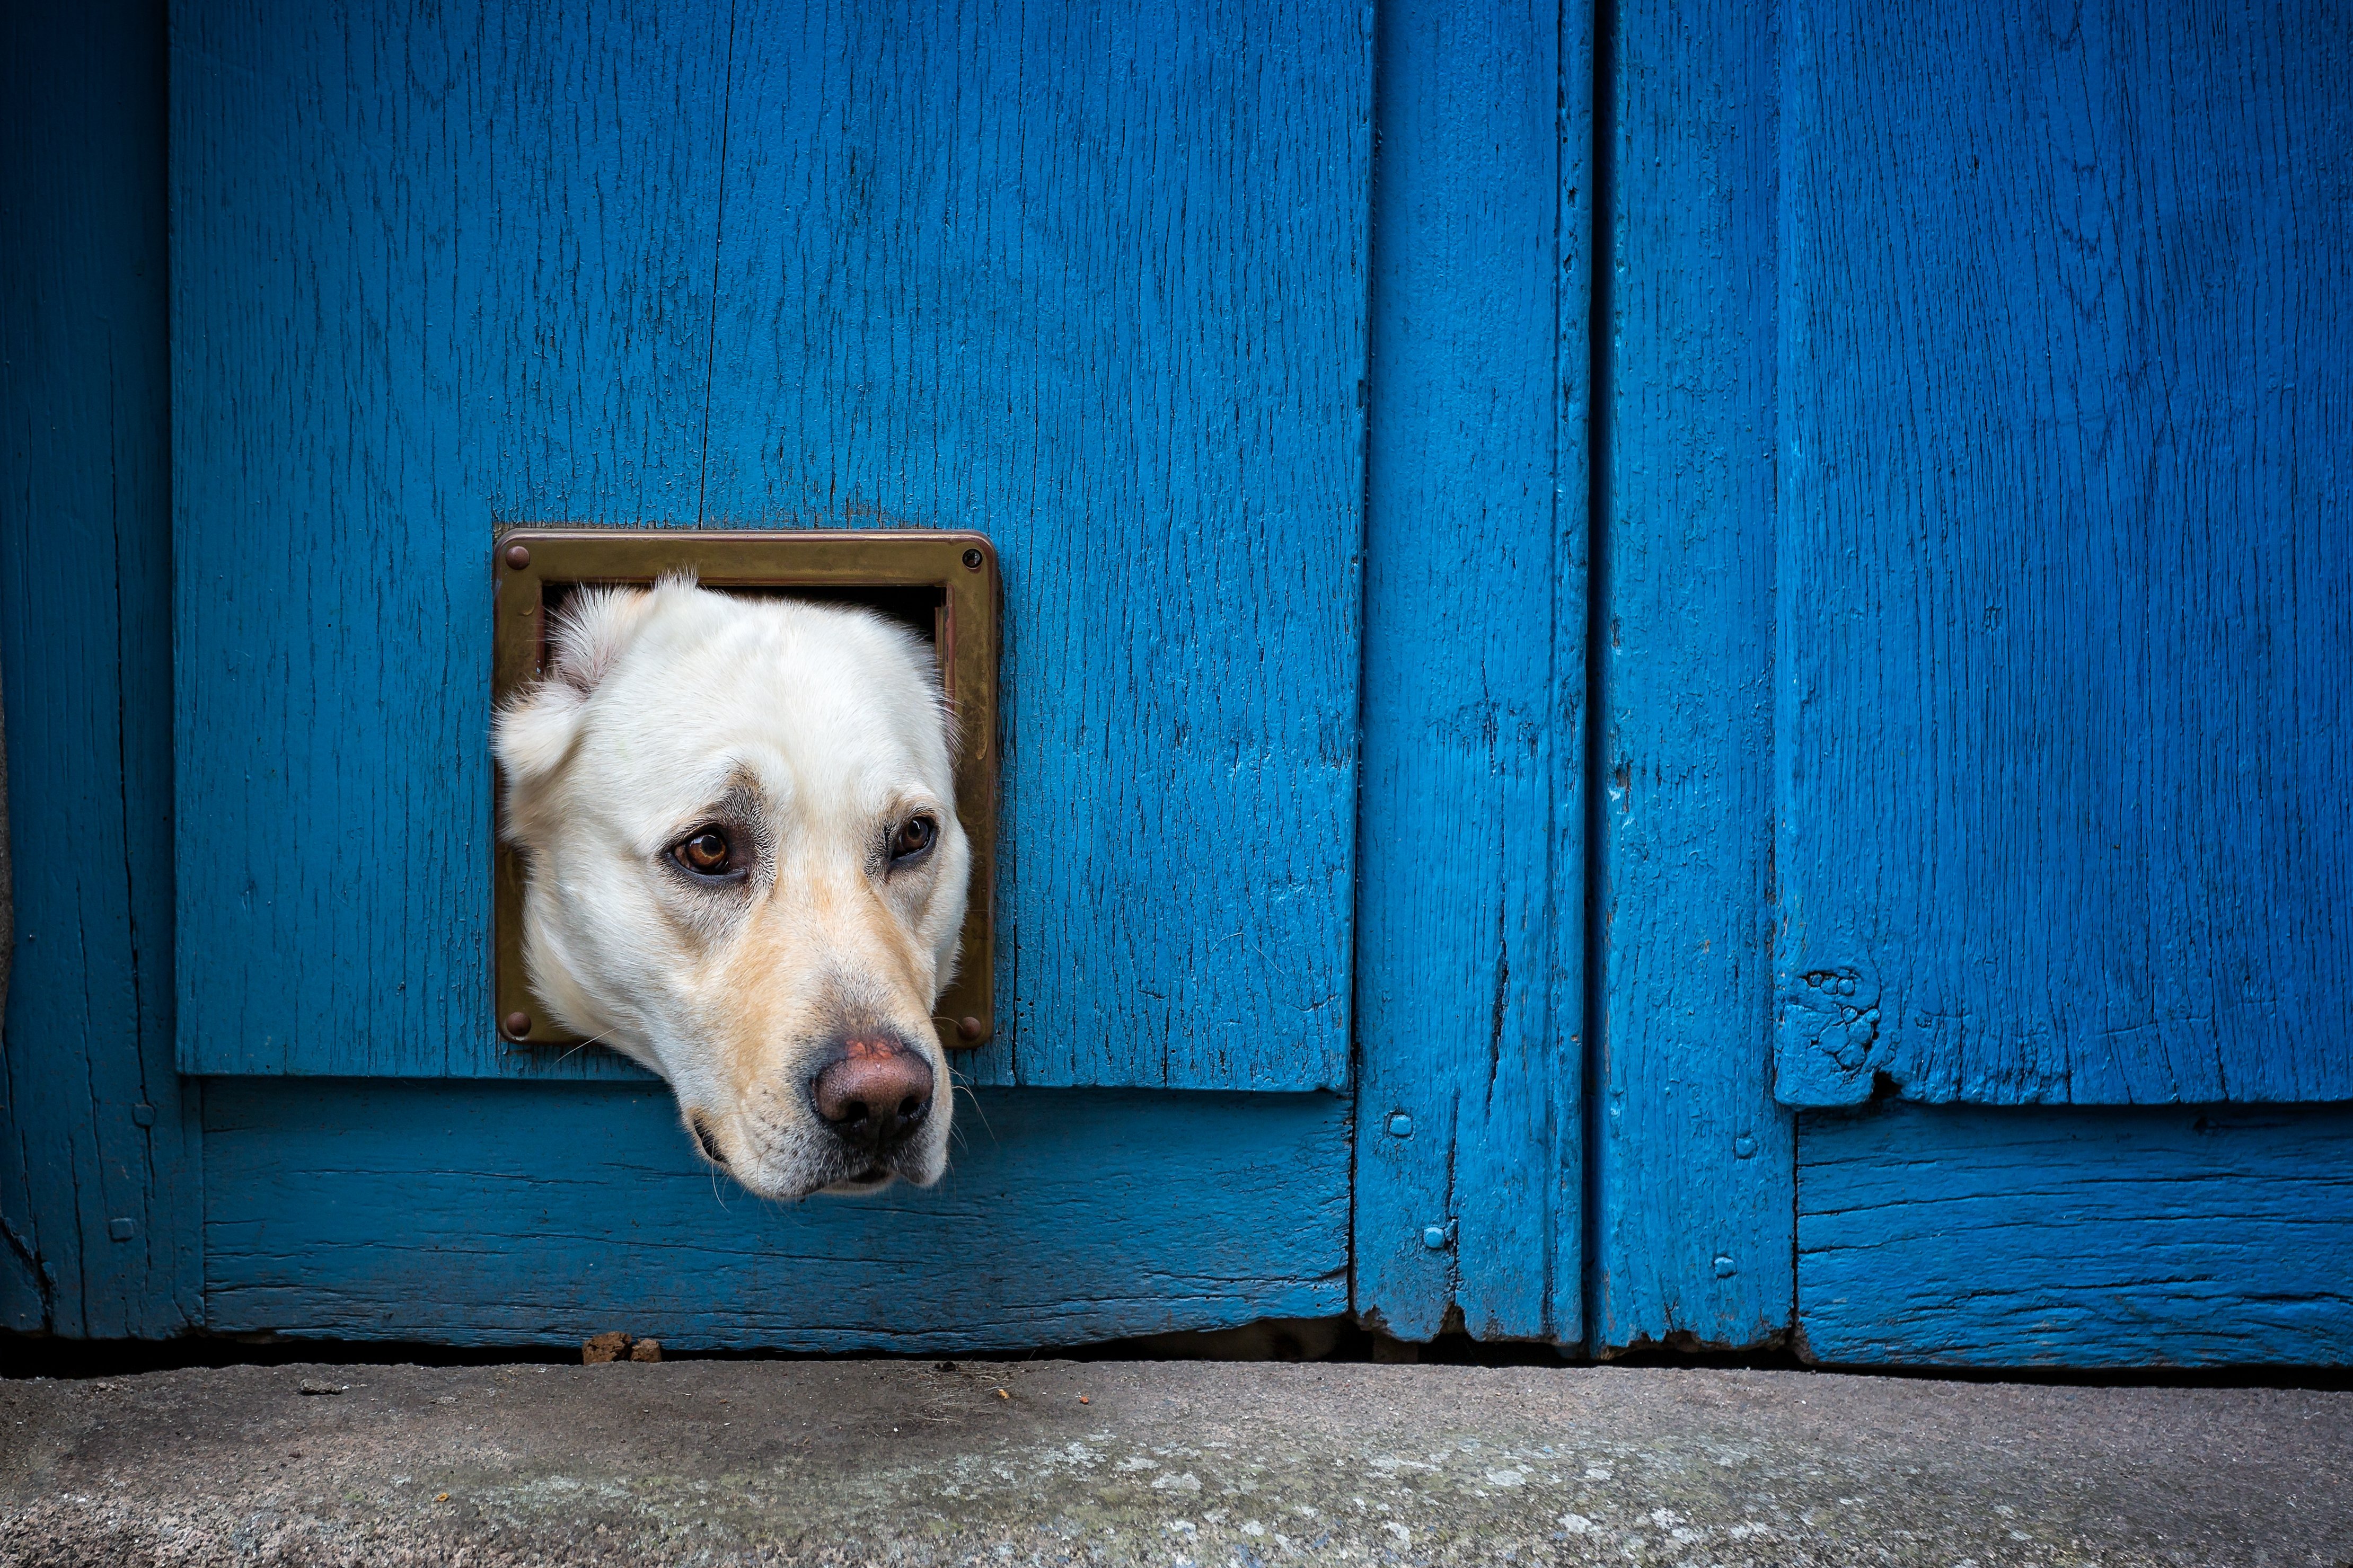 The head of a Labrador sticks out through a doggy door | Photo: Shutterstock/Nigel Jarvis